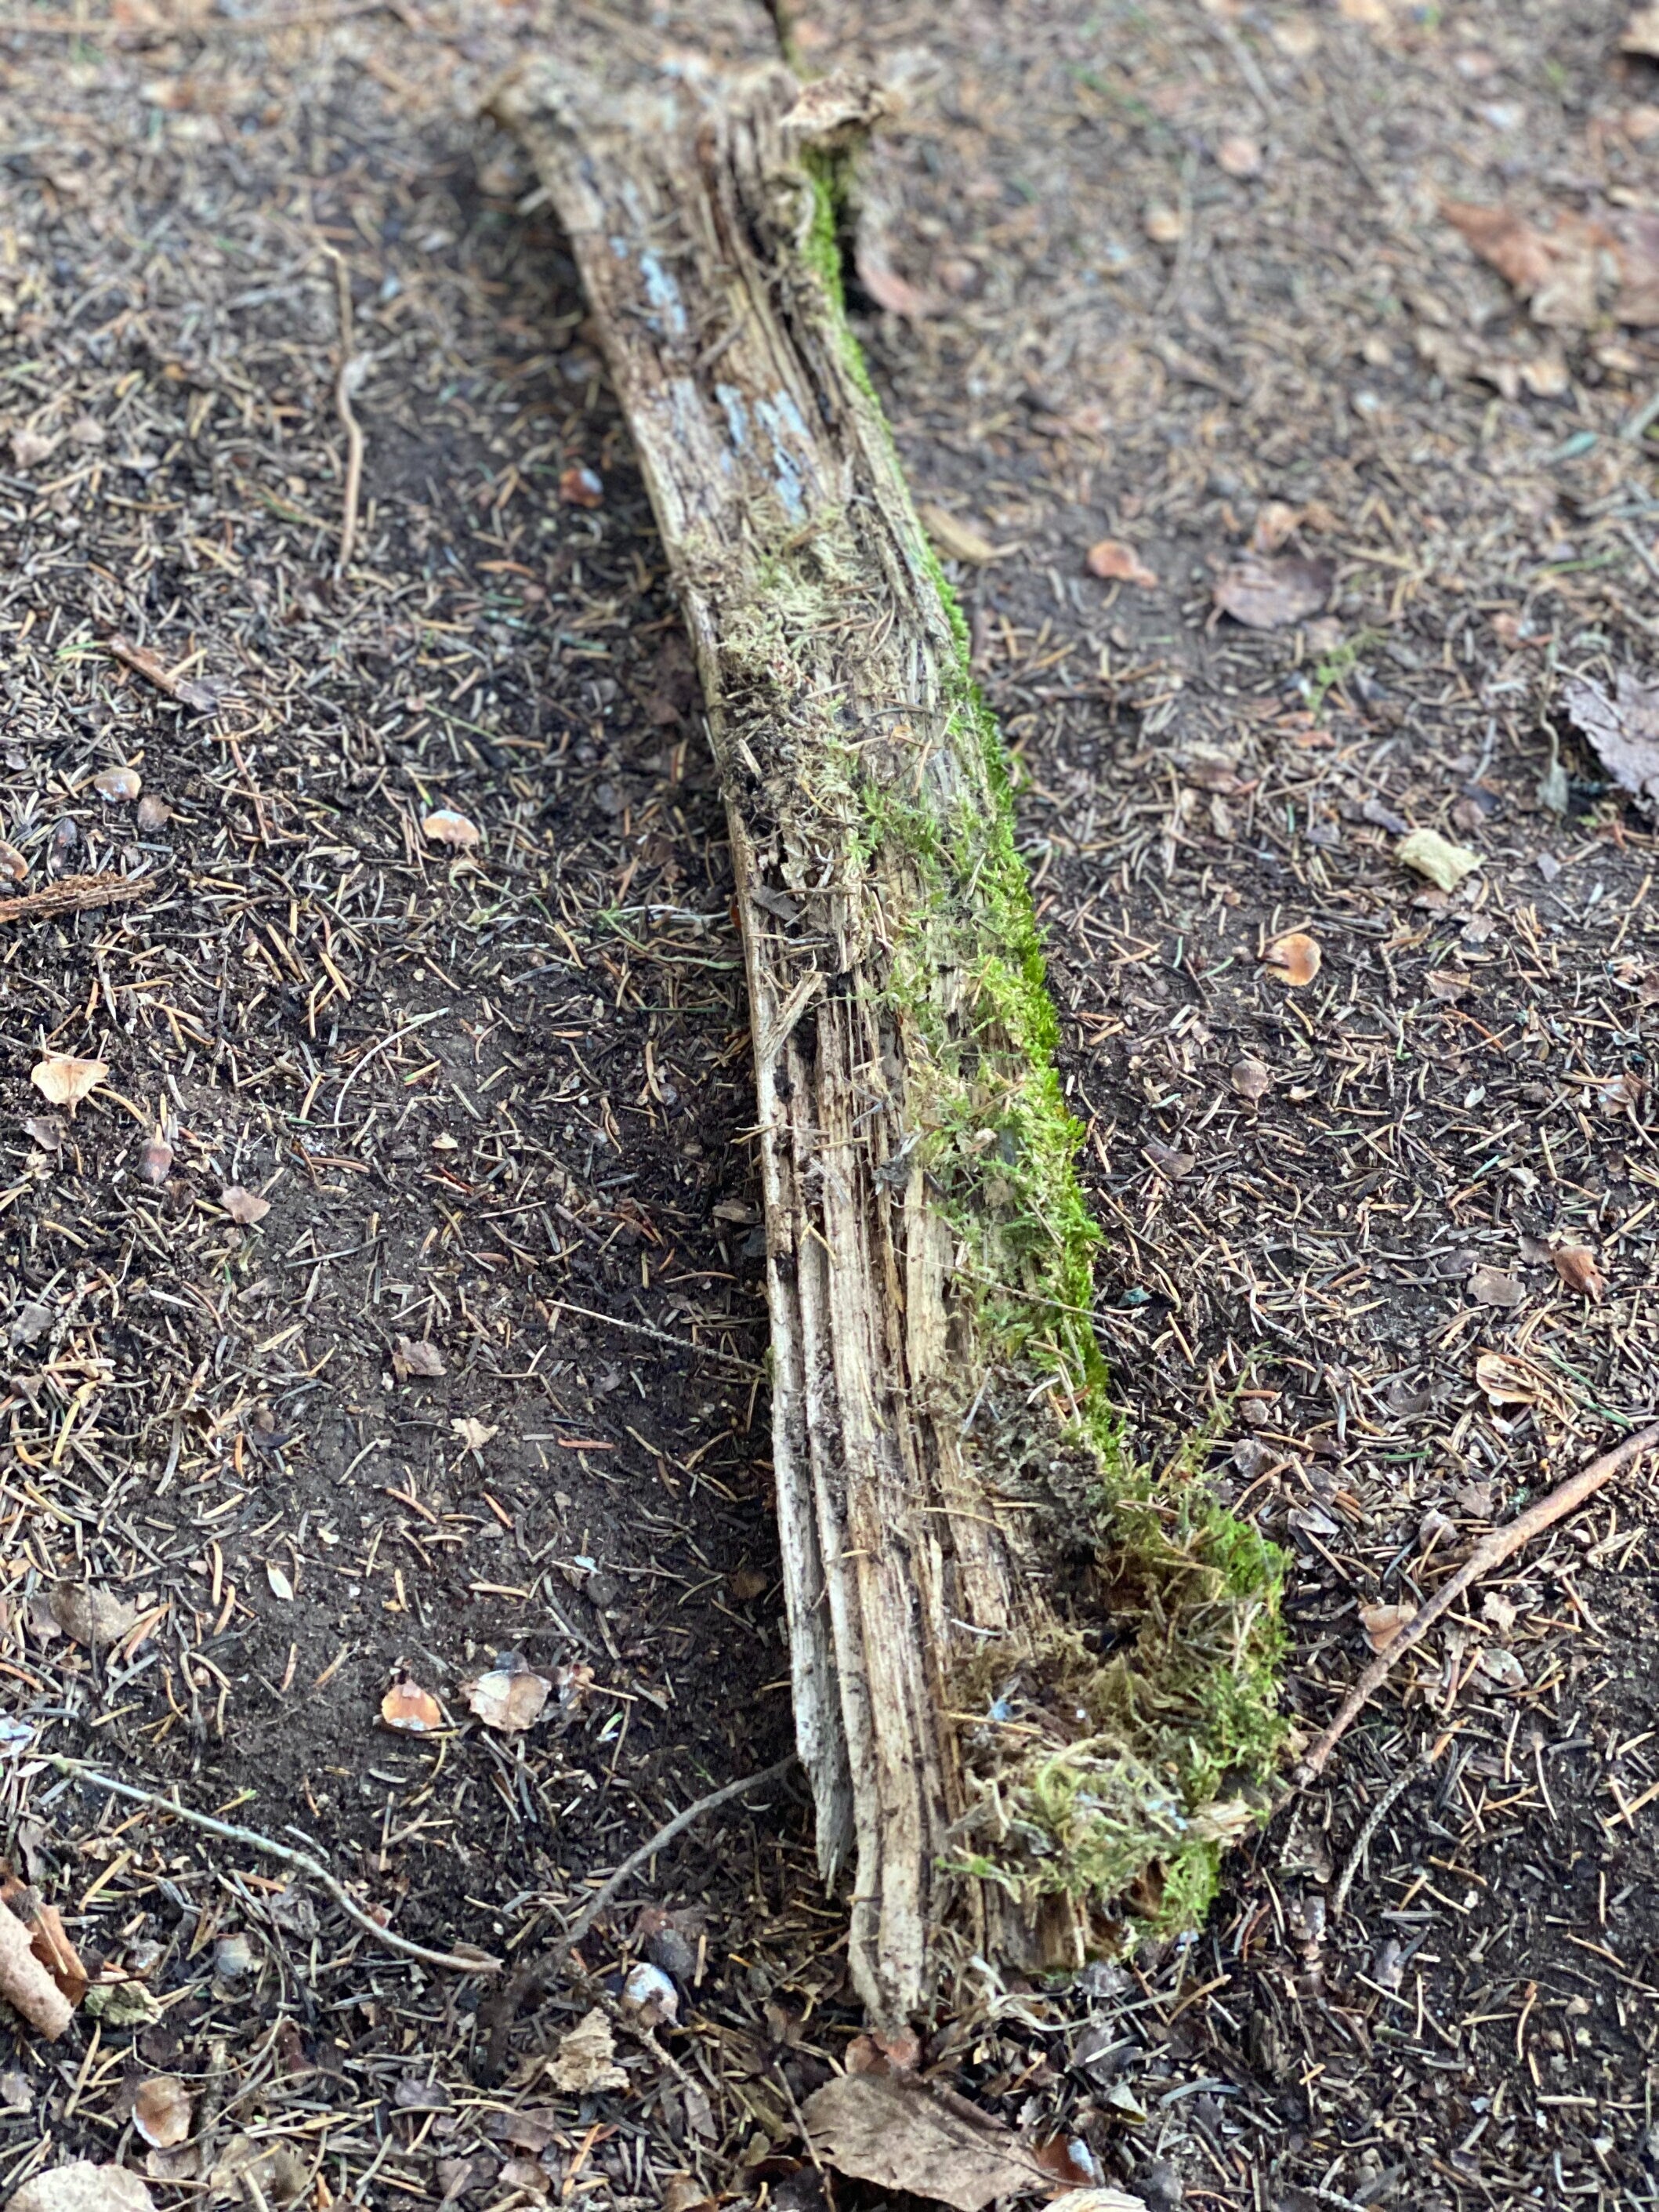 Moss Covered Log, Mossy Log, 25 Inches Long by 3 Inches Wide and 2 Inches High